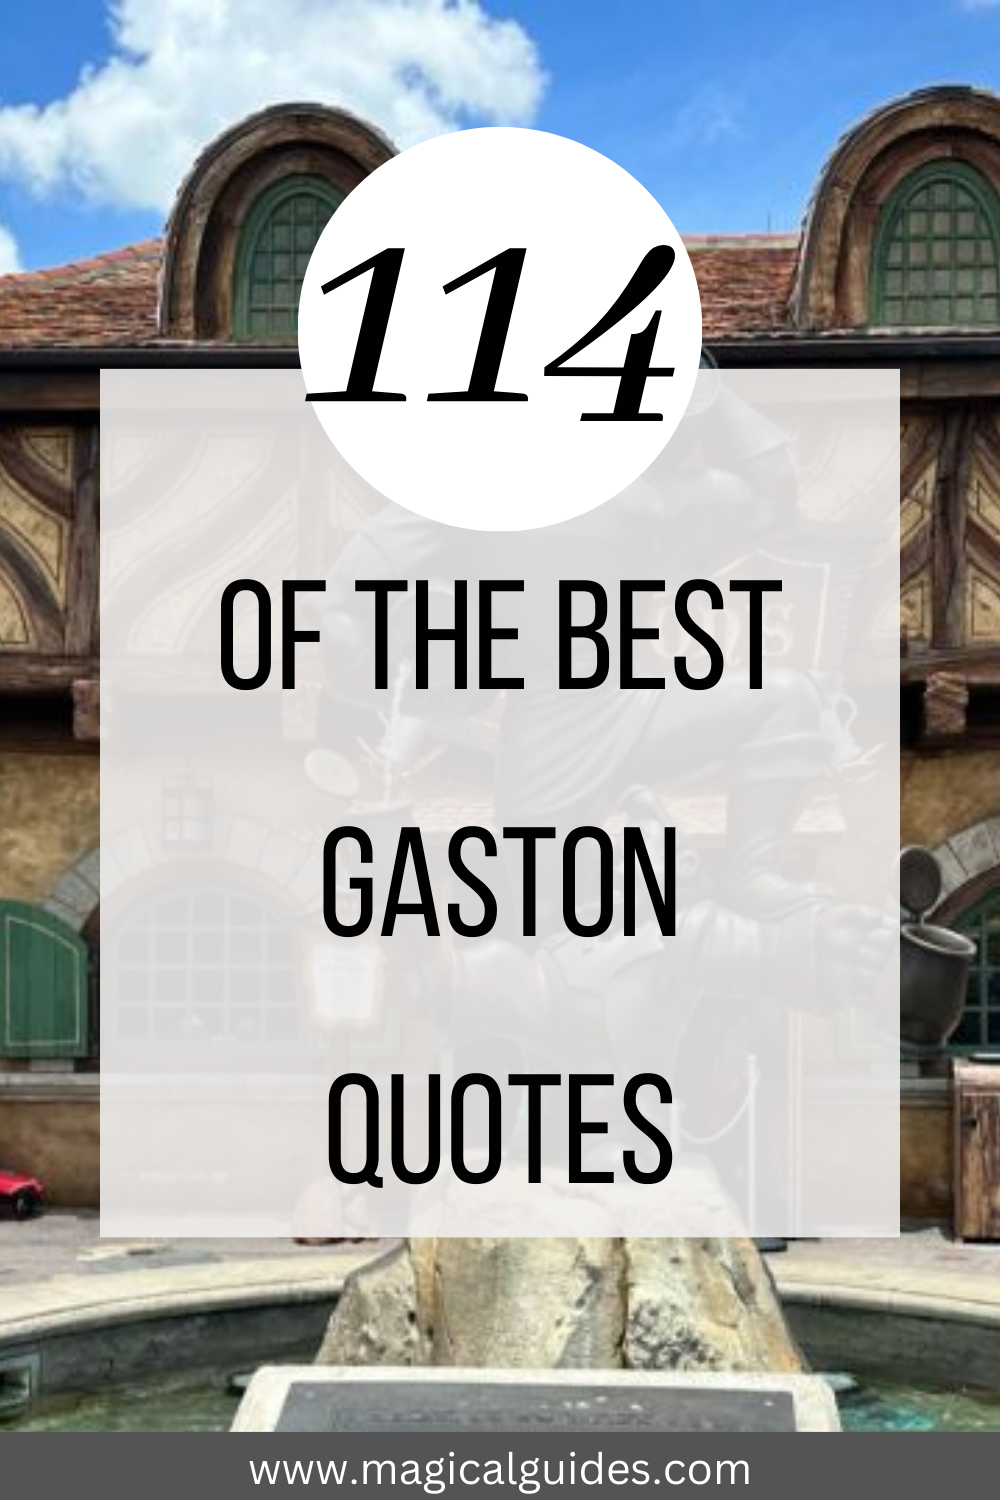 Gaston is one of my favorite Disney villains. Despite the arrogant attitude, Gaston brings a lot of humor. Find 114 Gaston Quotes with Belle, Maurice, LeFou, and the Beast here.